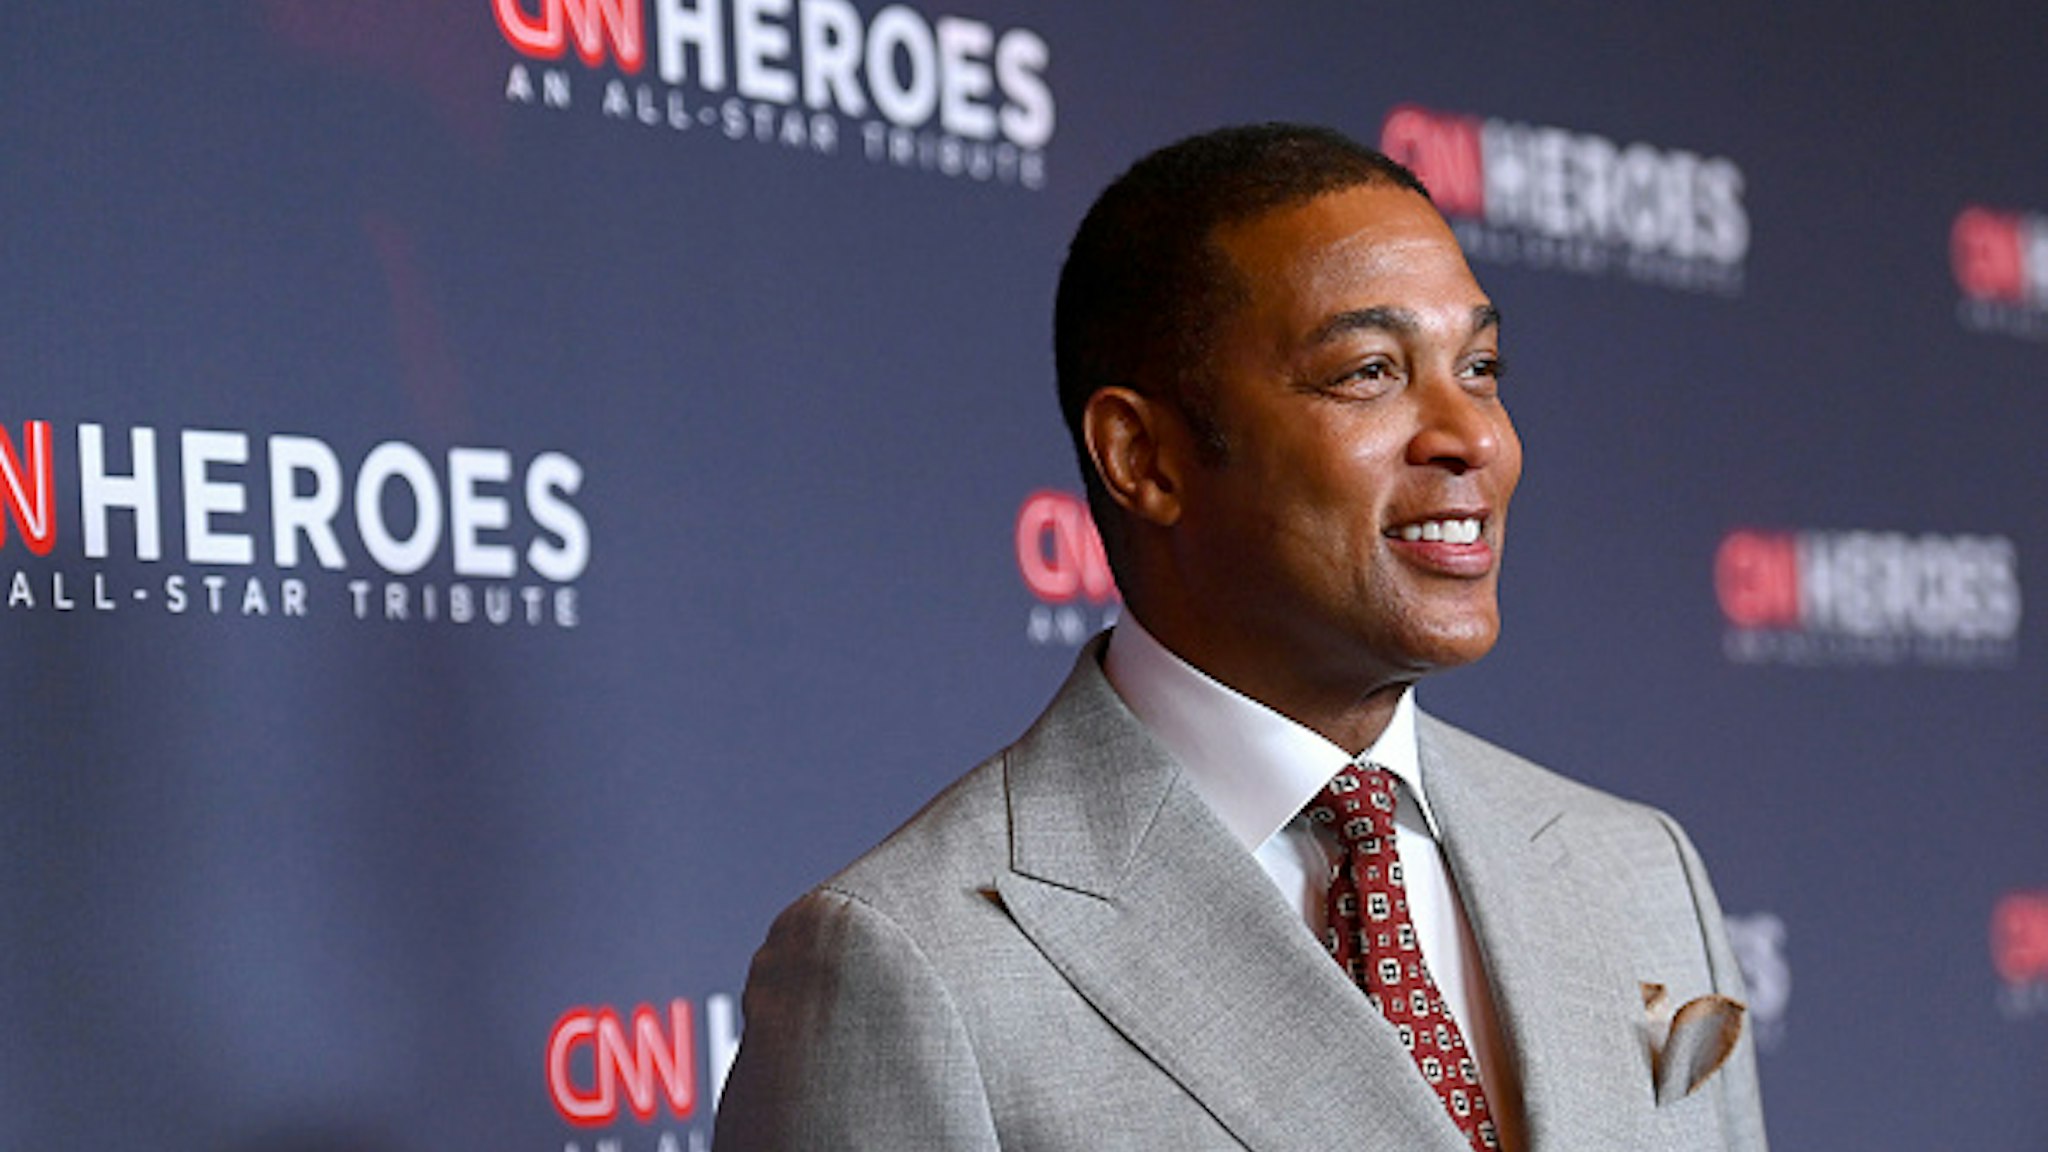 NEW YORK, NEW YORK - DECEMBER 08: Don Lemon attends CNN Heroes at the American Museum of Natural History on December 08, 2019 in New York City.